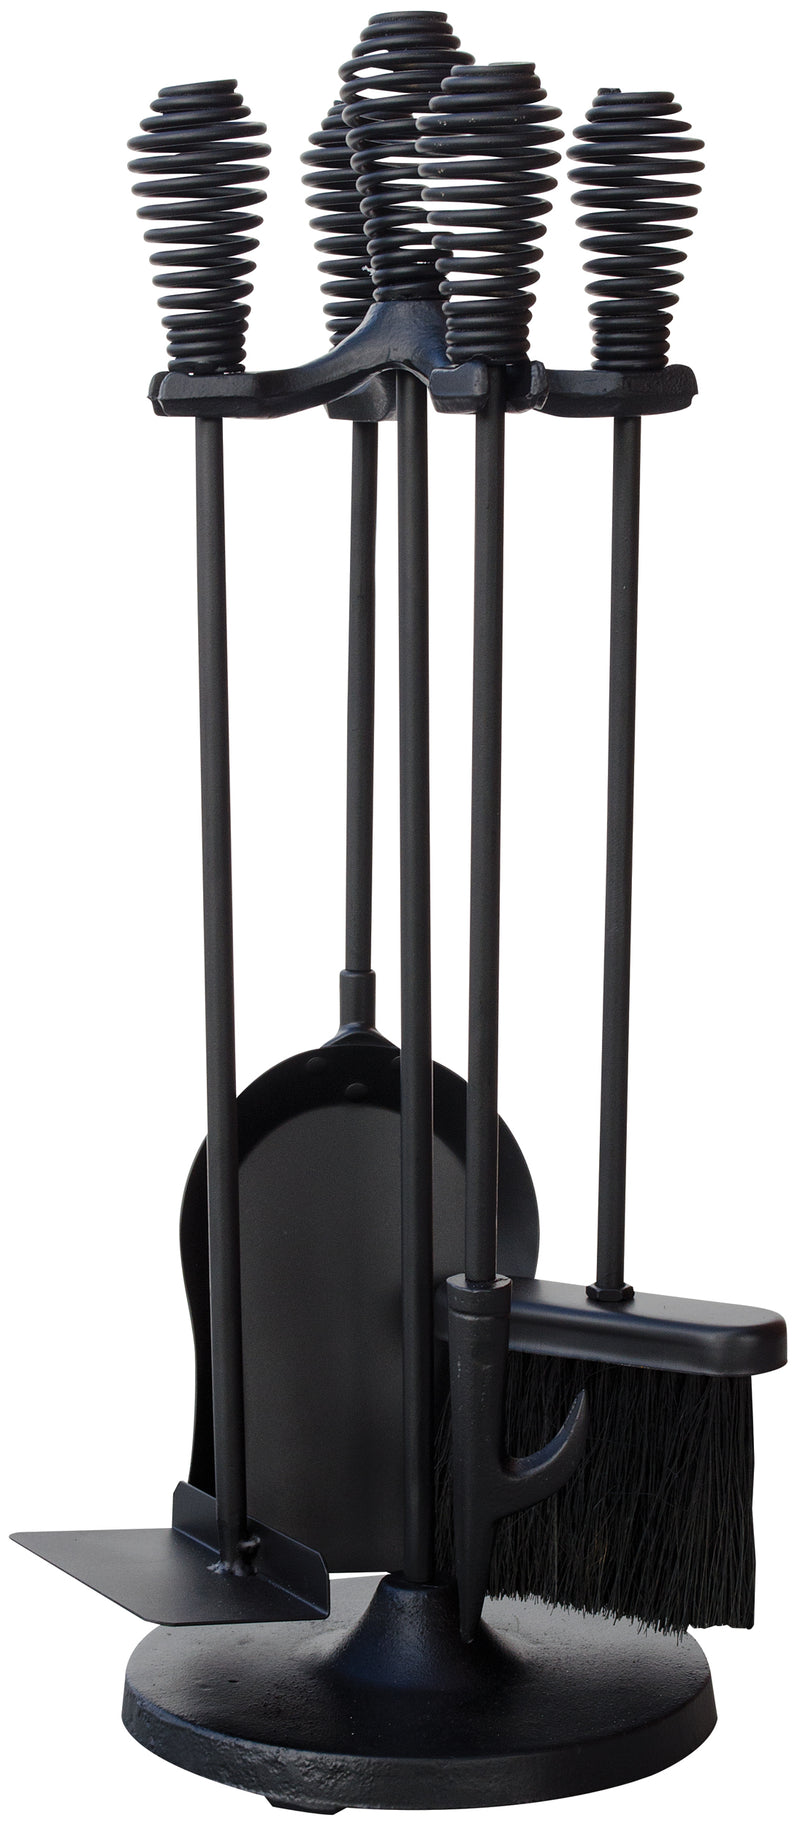 UniFlame 5 Piece Black Finish Mini Fireset with Spring Handles